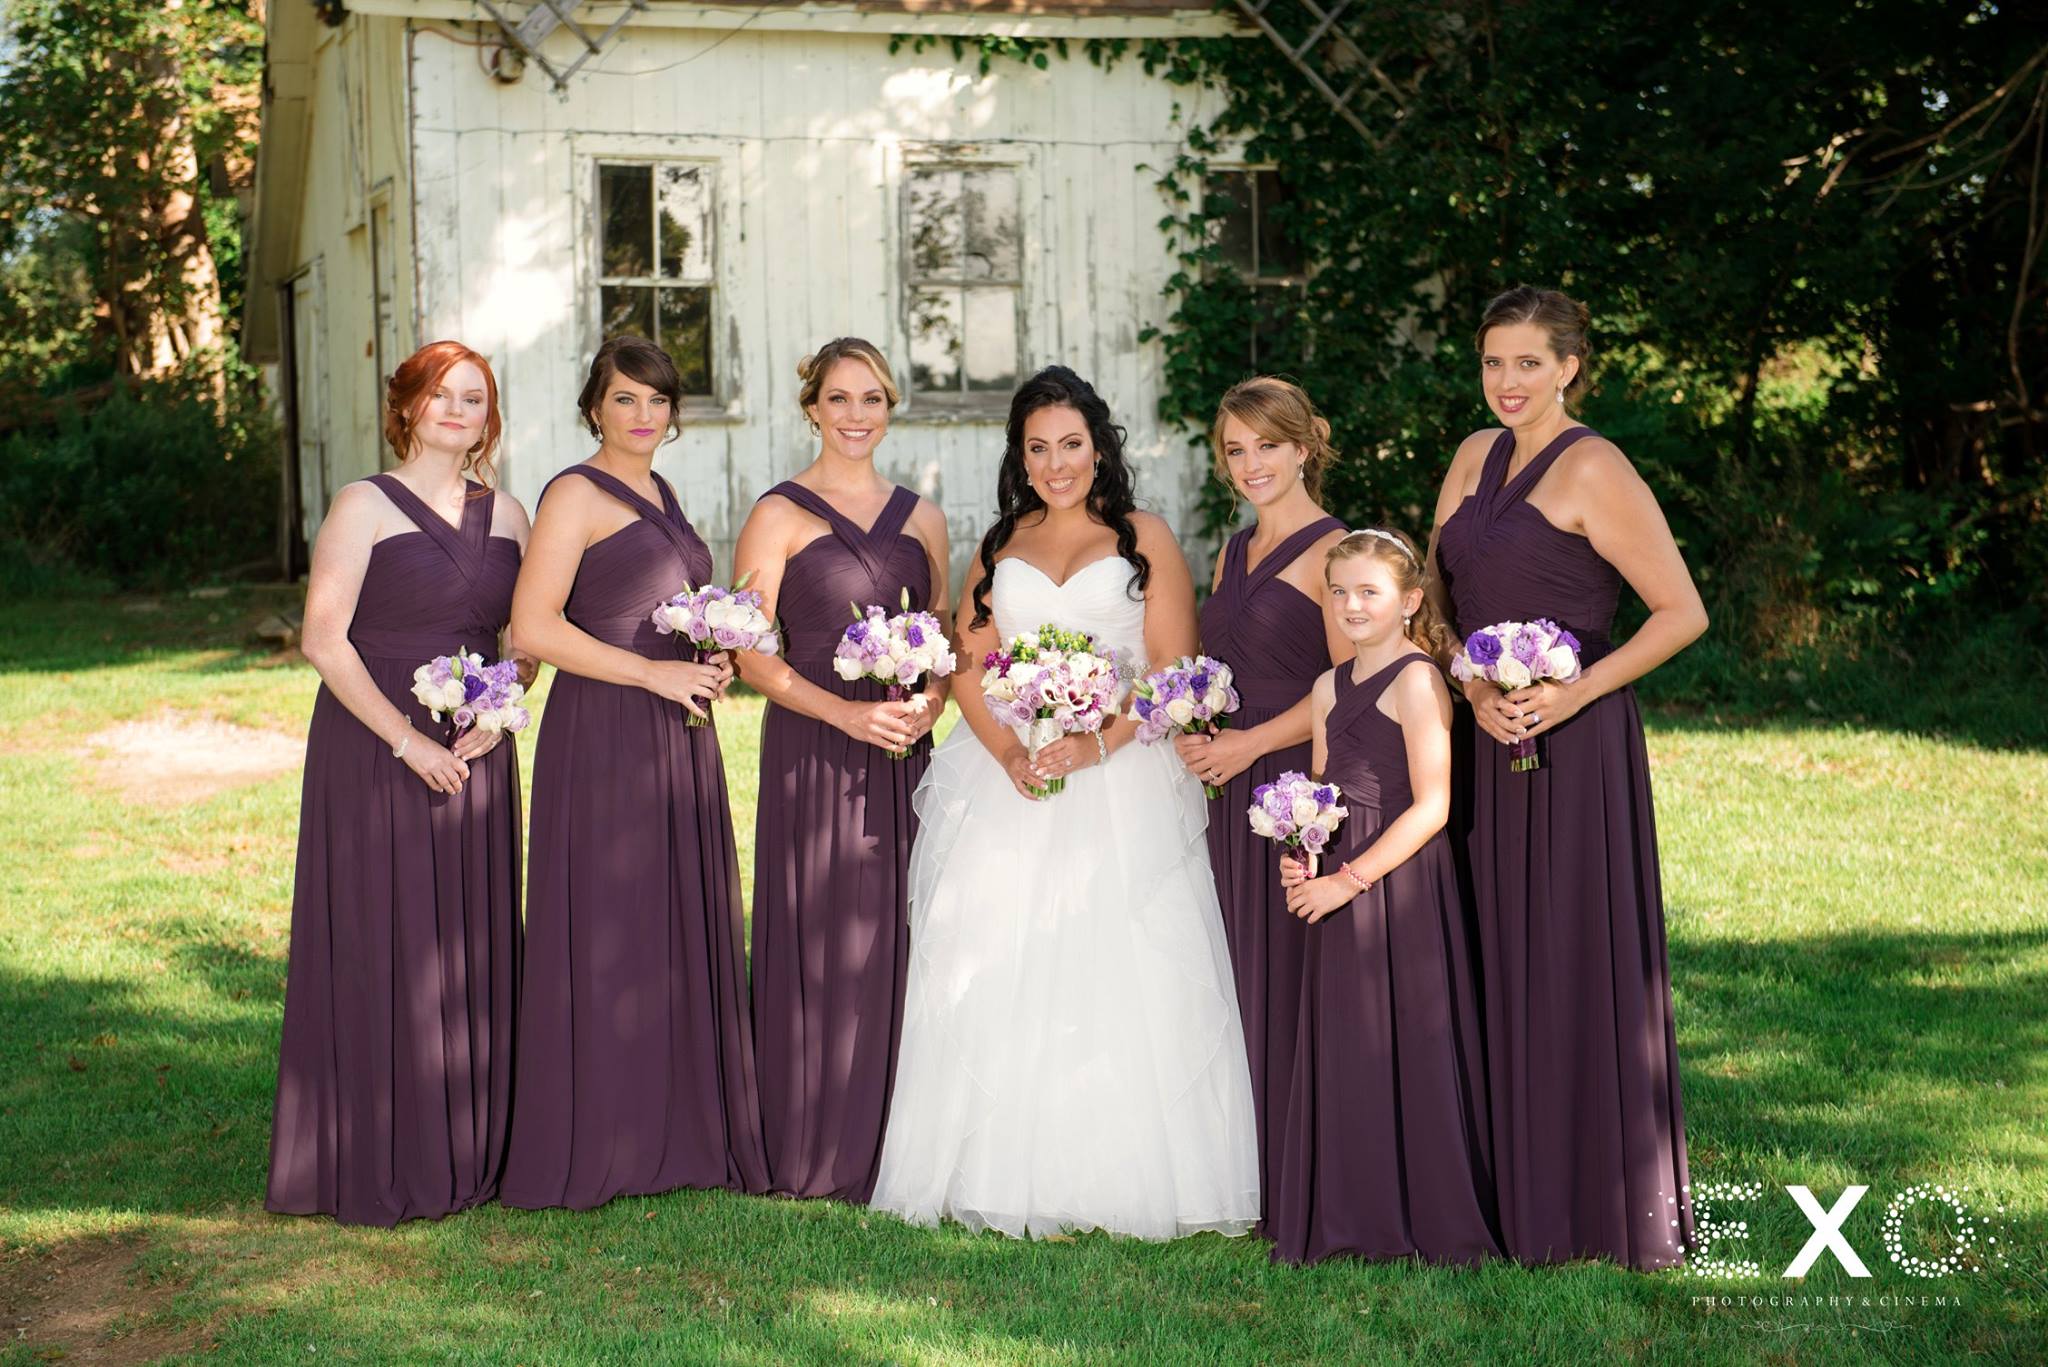 bride and bridesmaids together on grass